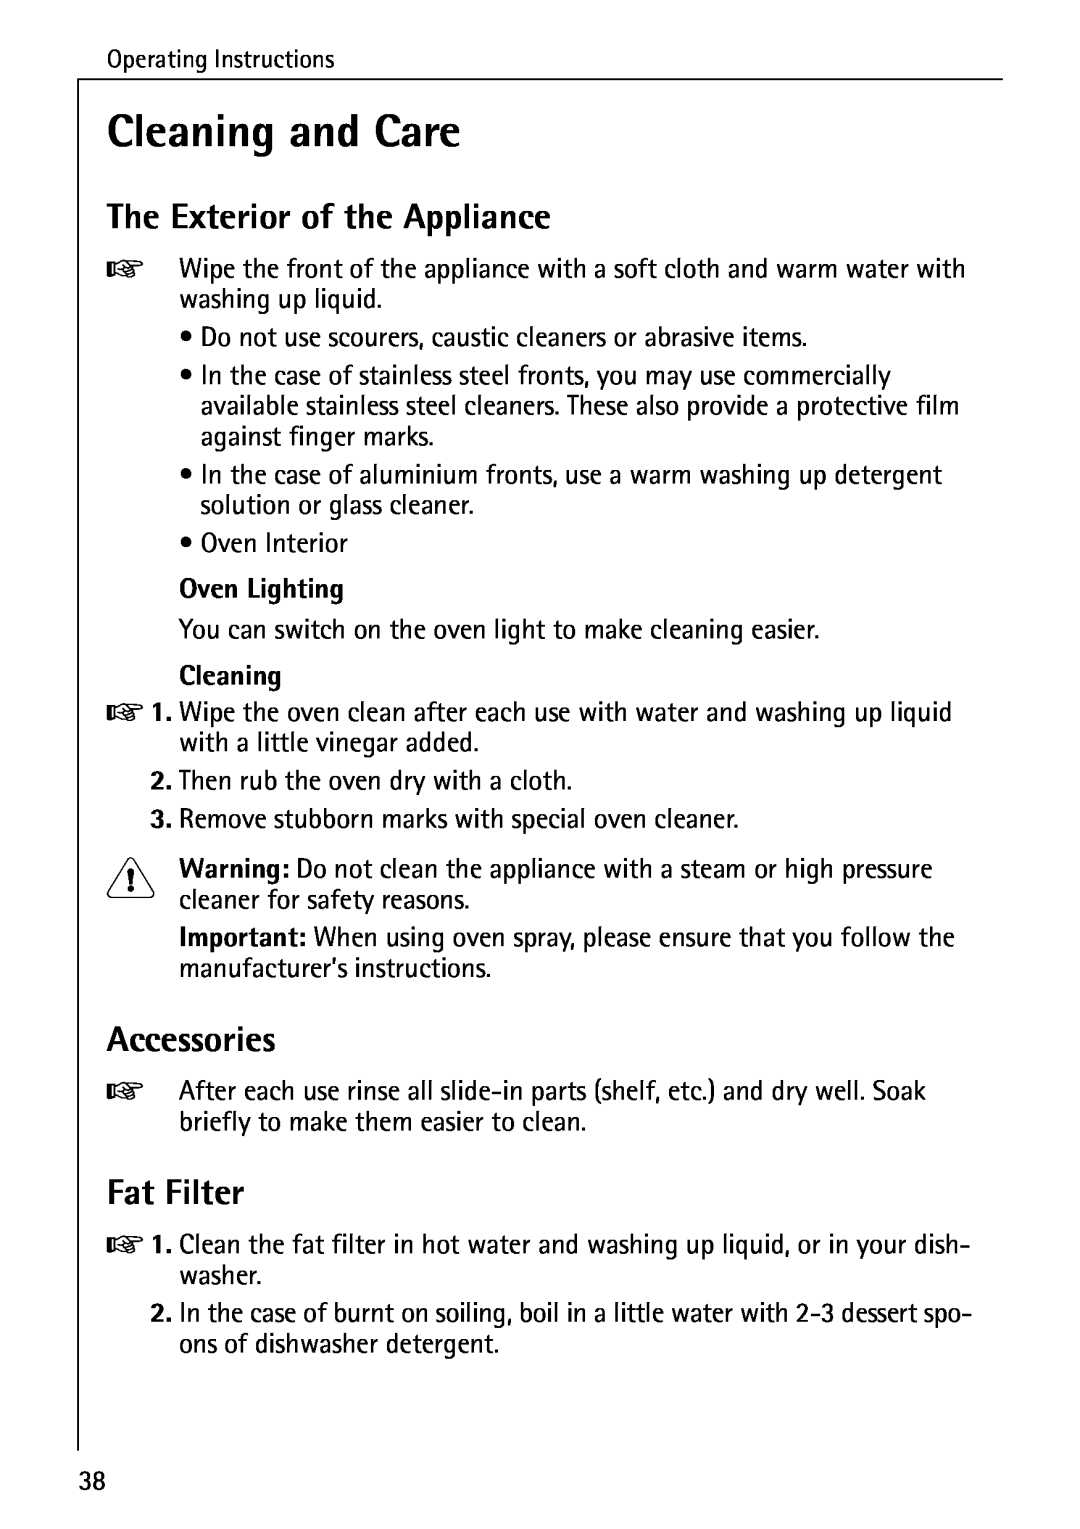 AEG B 4100 operating instructions Cleaning and Care, The Exterior of the Appliance, Accessories, Fat Filter, Oven Lighting 